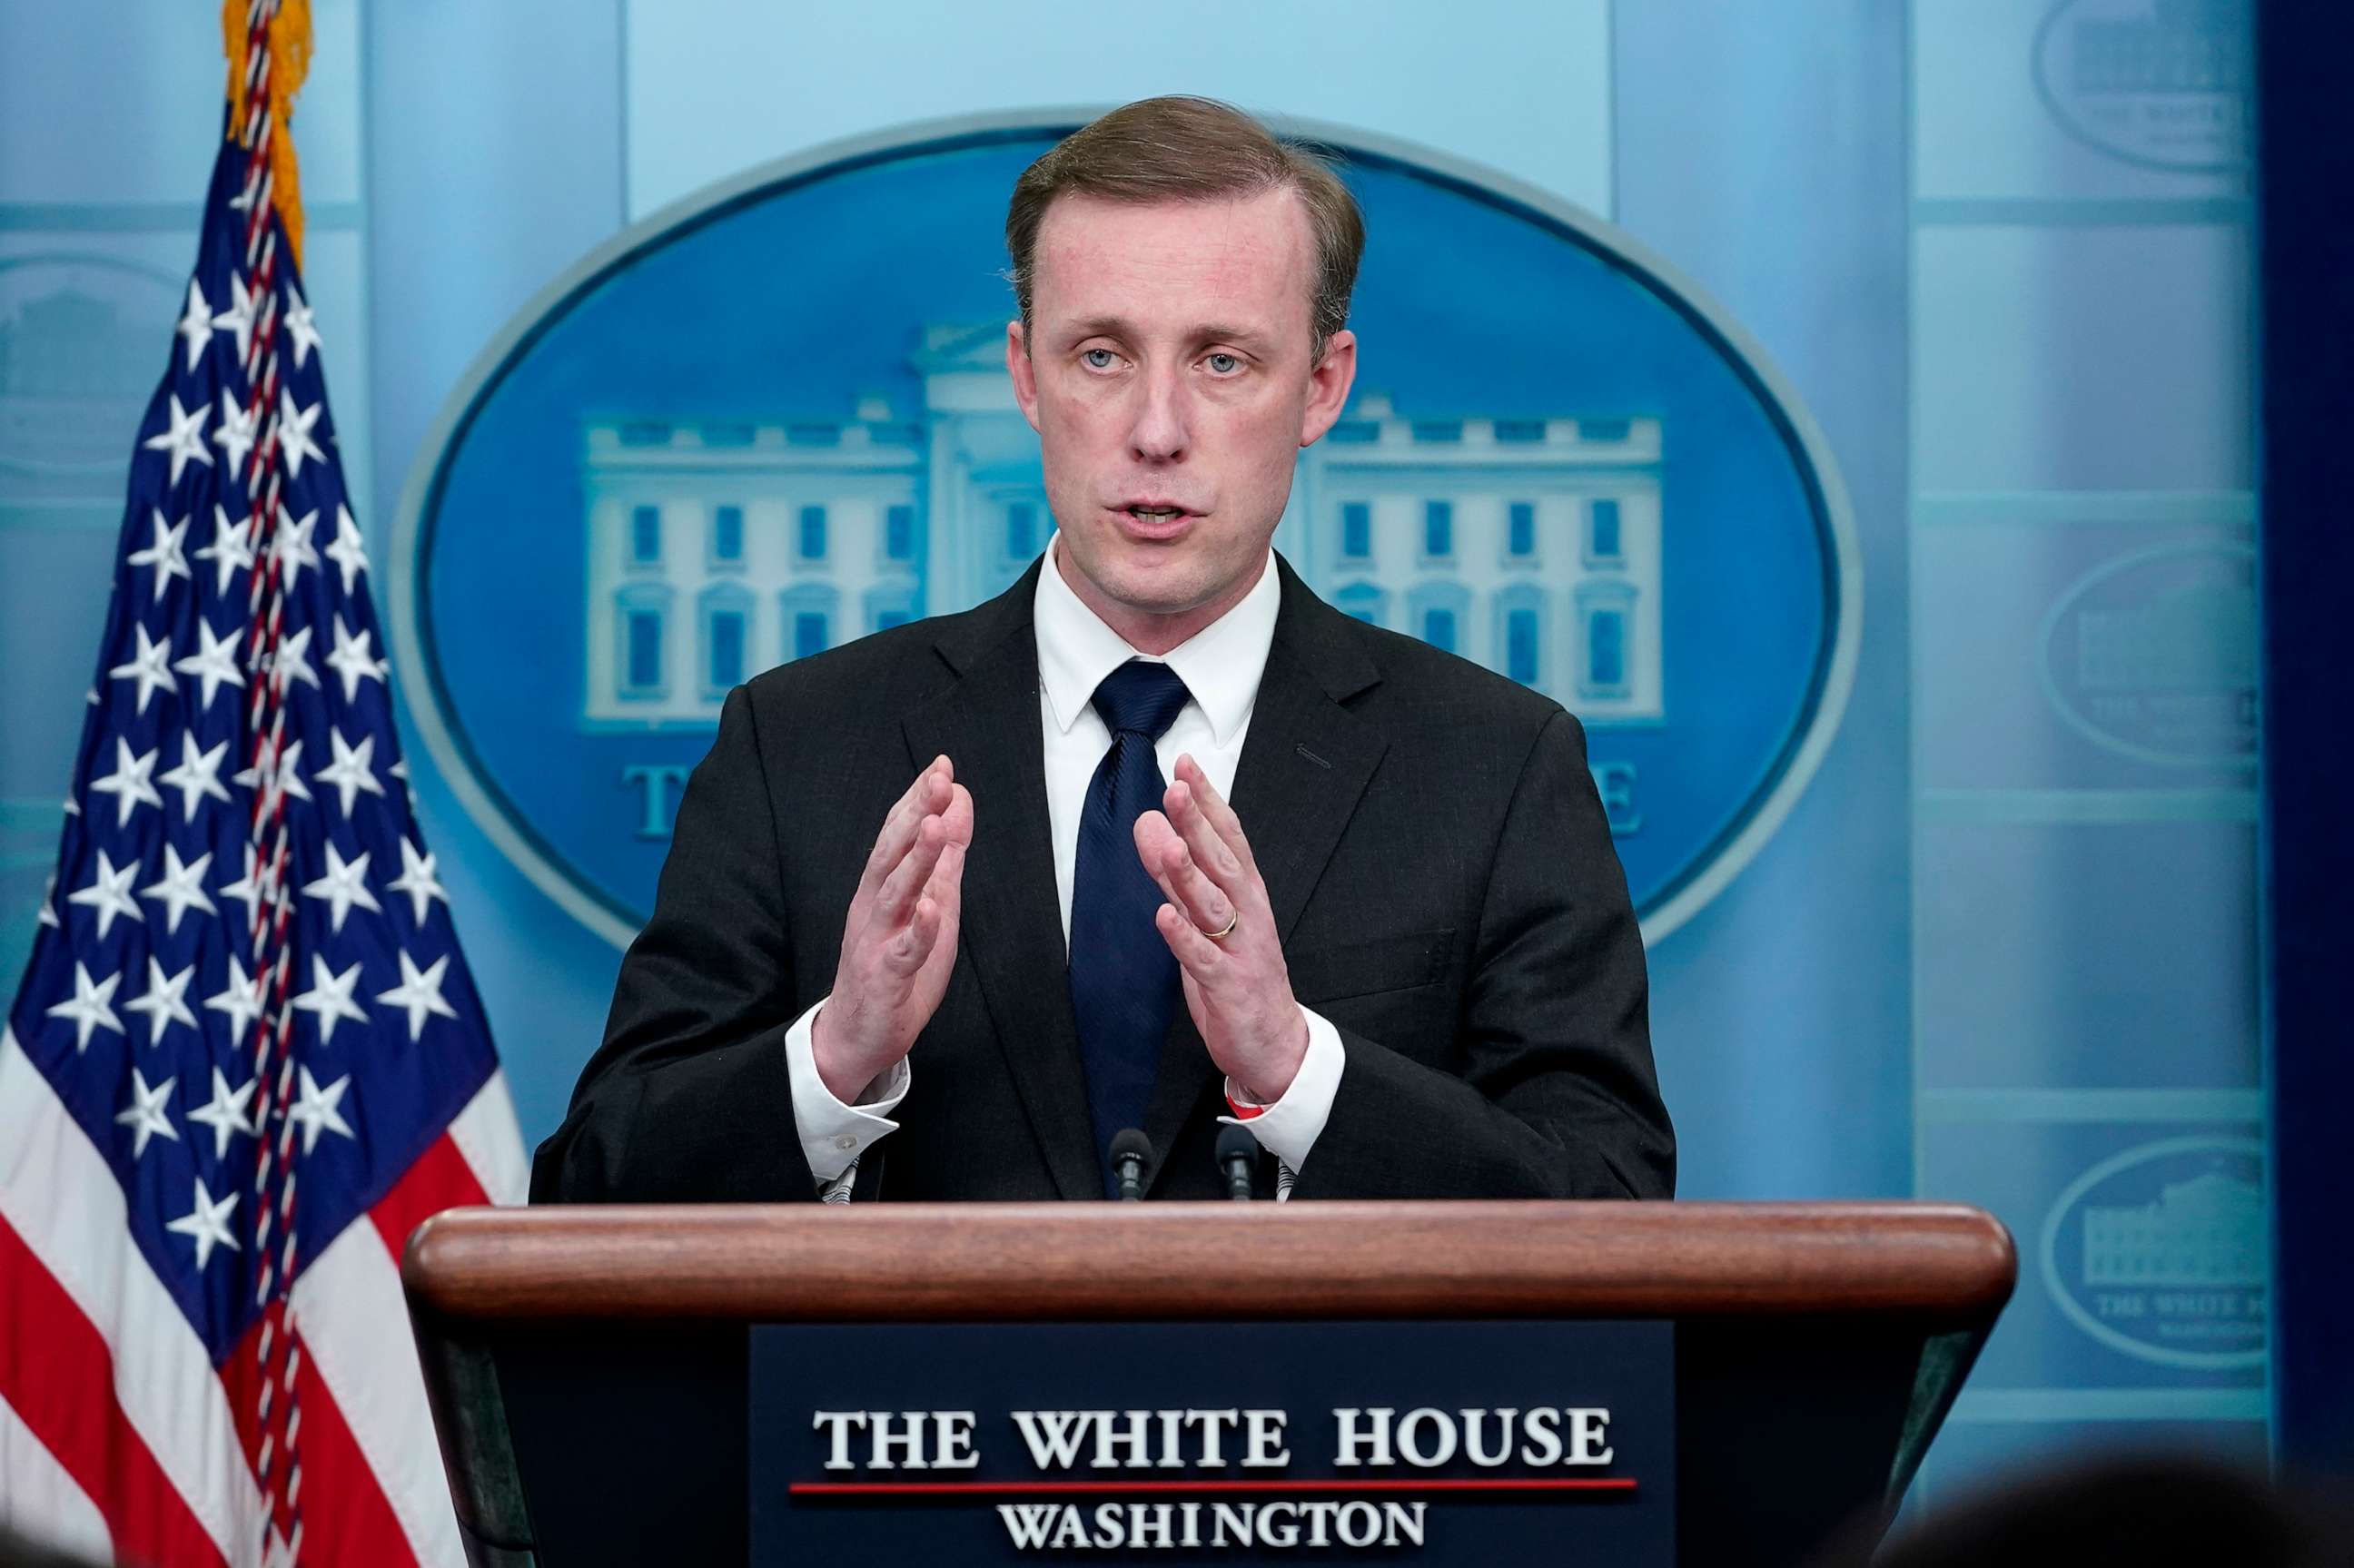 PHOTO: In this Dec. 12, 2022, file photo, White House national security adviser Jake Sullivan speaks during the daily briefing at the White House in Washington, D.C.